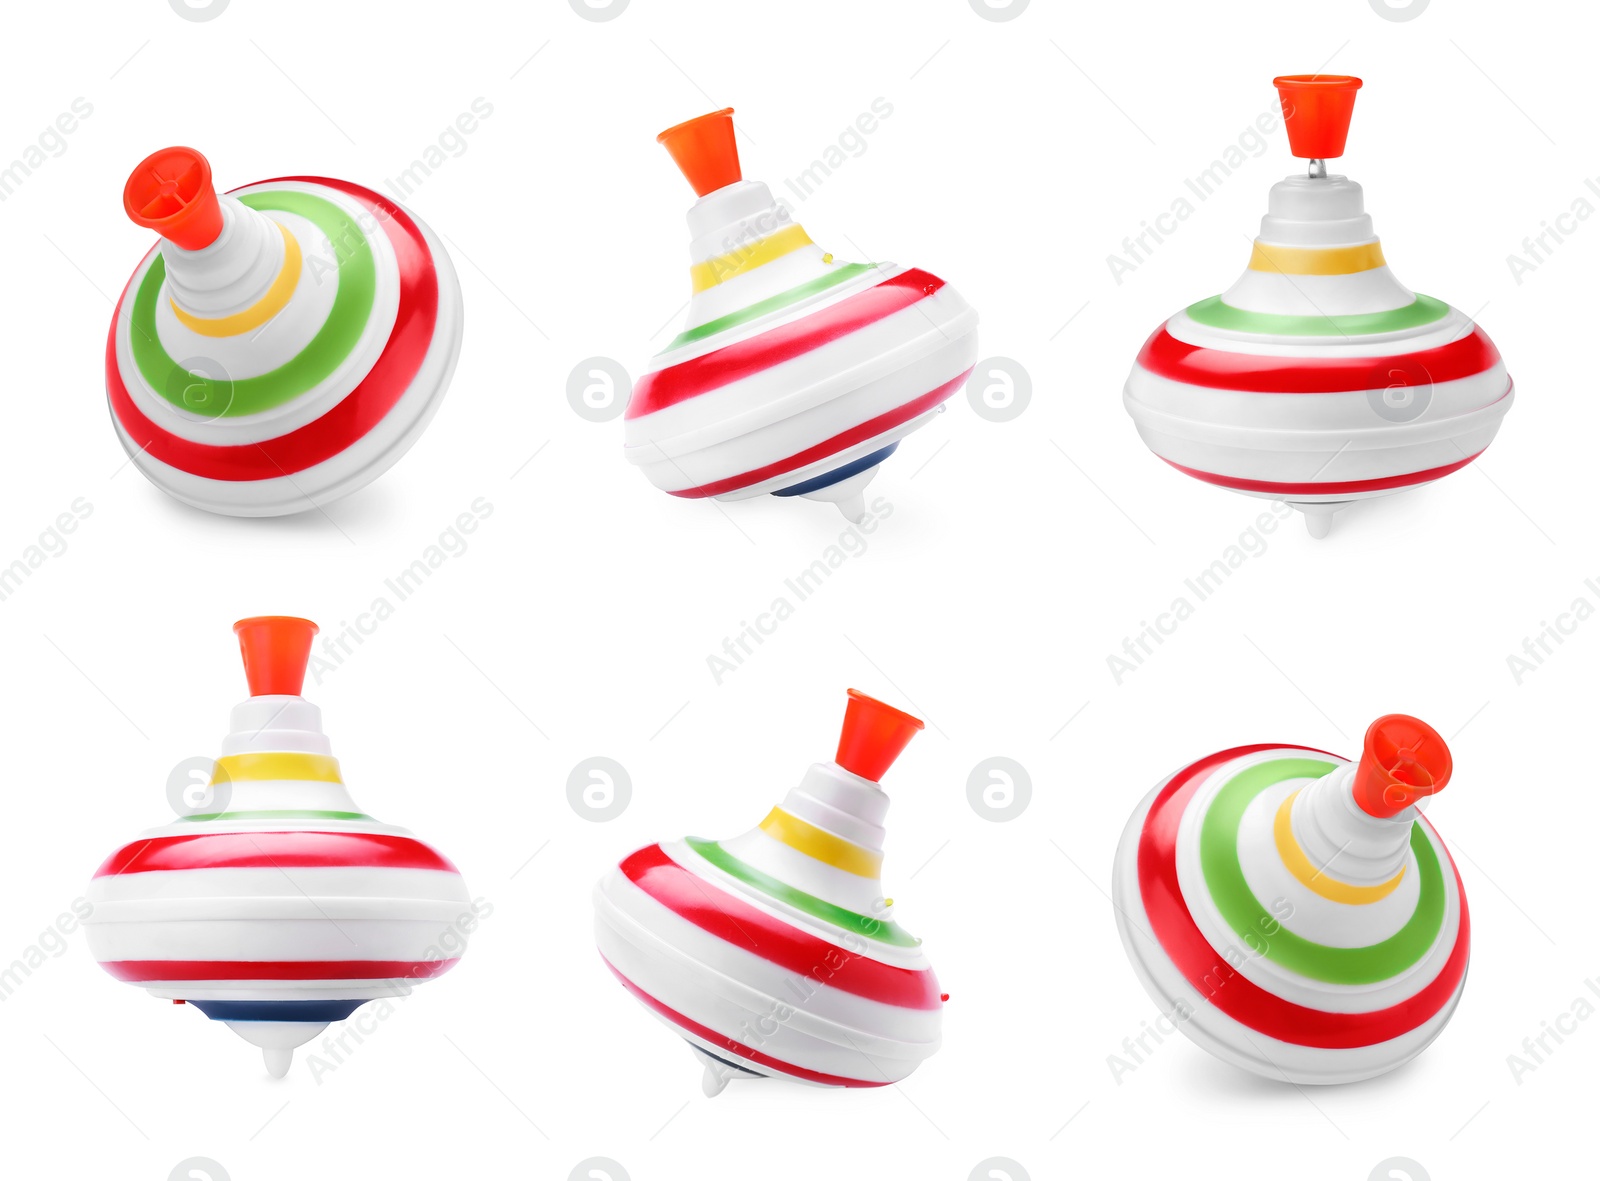 Image of Colorful spinning tops isolated on white. Toy whirligig